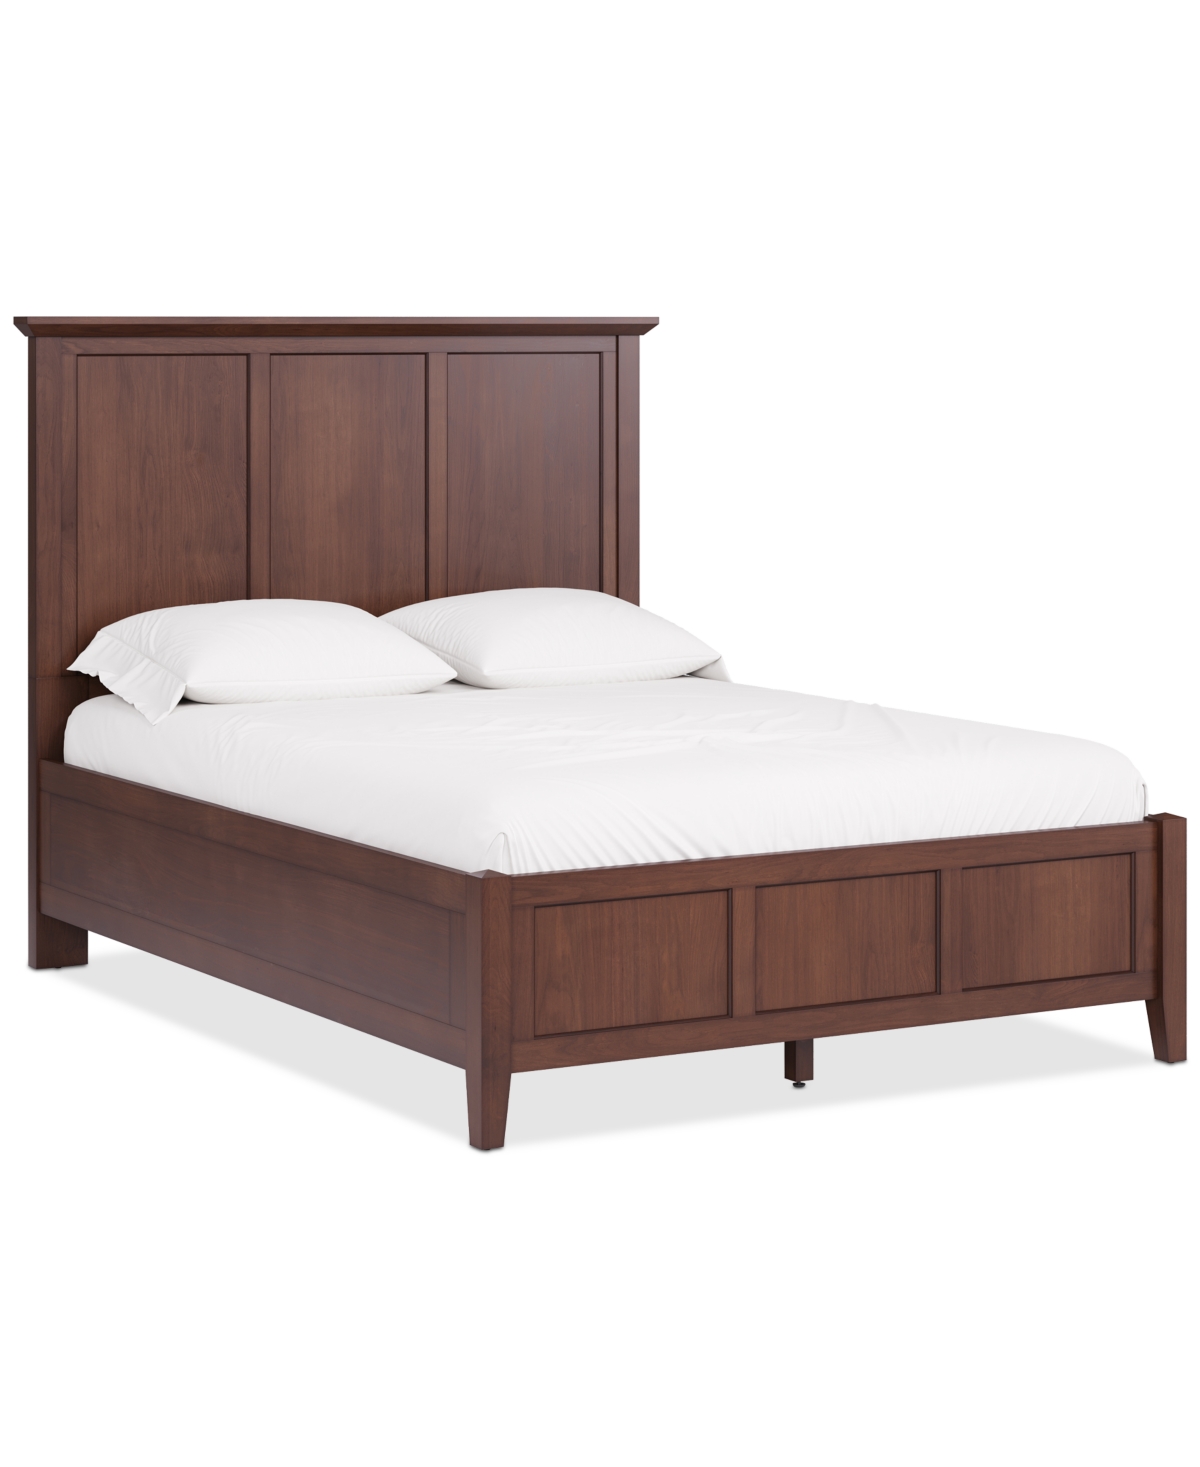 Furniture Hedworth California King Bed In Brown